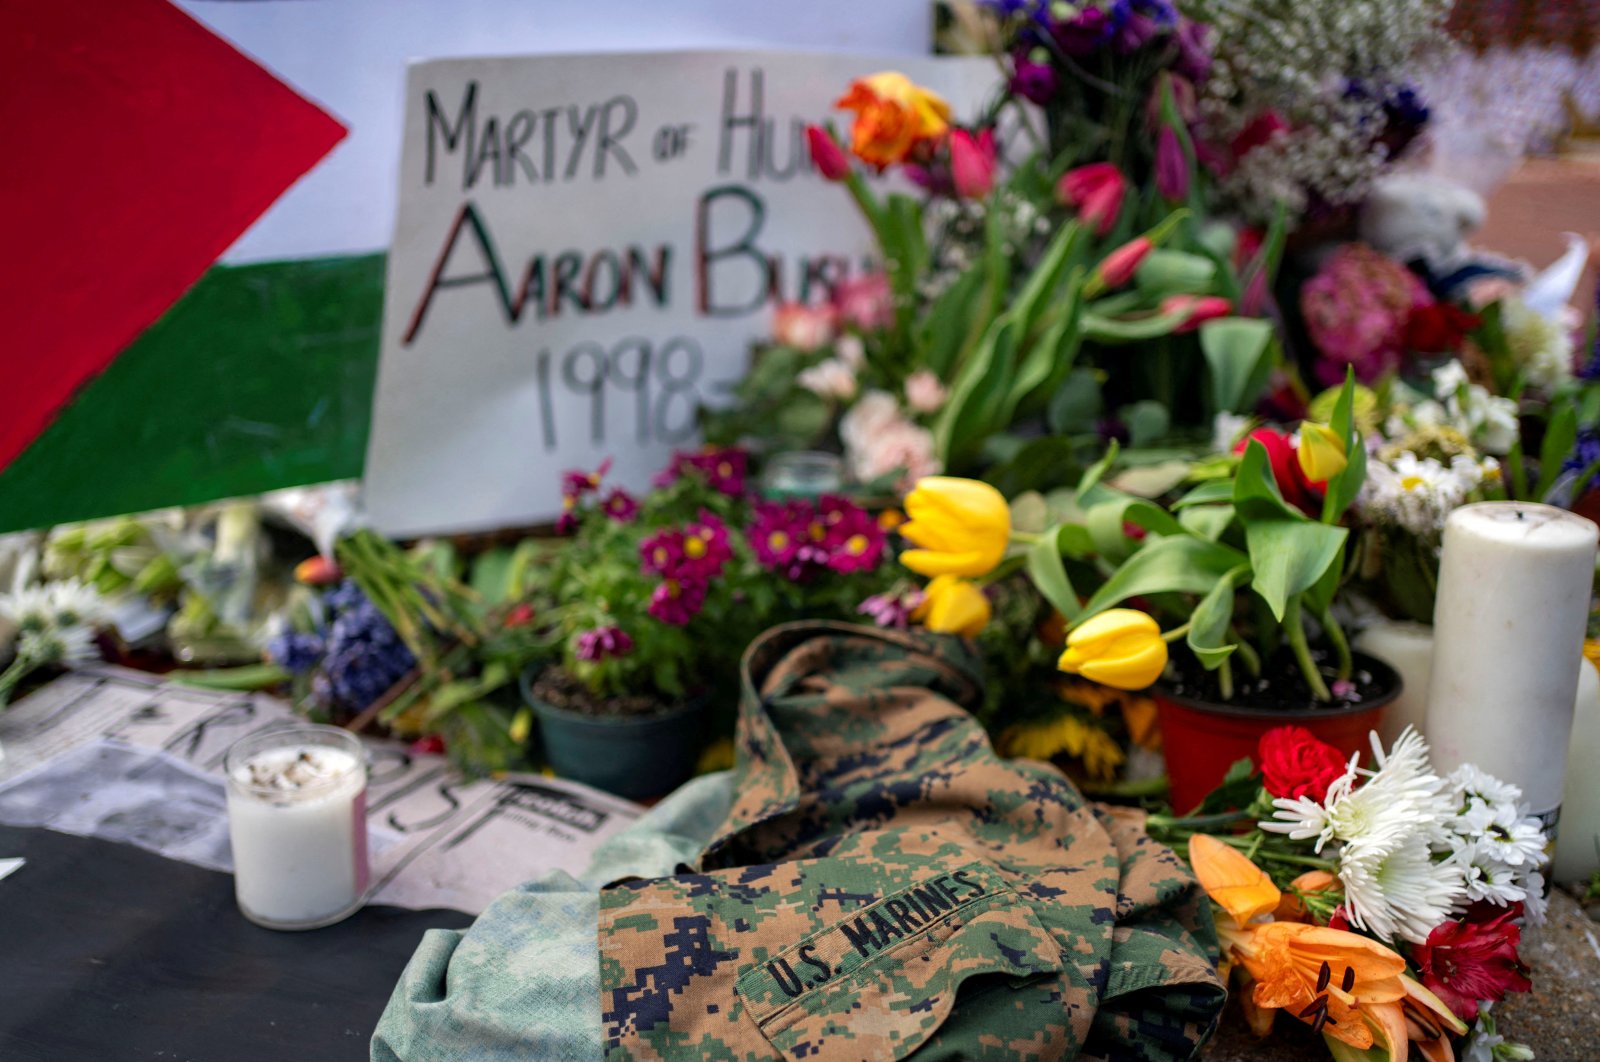 A United States Marines jacket, flowers and candles are placed outside the Israeli Embassy in Washington at a memorial for Aaron Bushnell, an active duty U.S. Air Force member who died after setting himself on fire outside the embassy in an act of protest against the war in Gaza, Washington, U.S., March 2, 2024. (Reuters Photo)